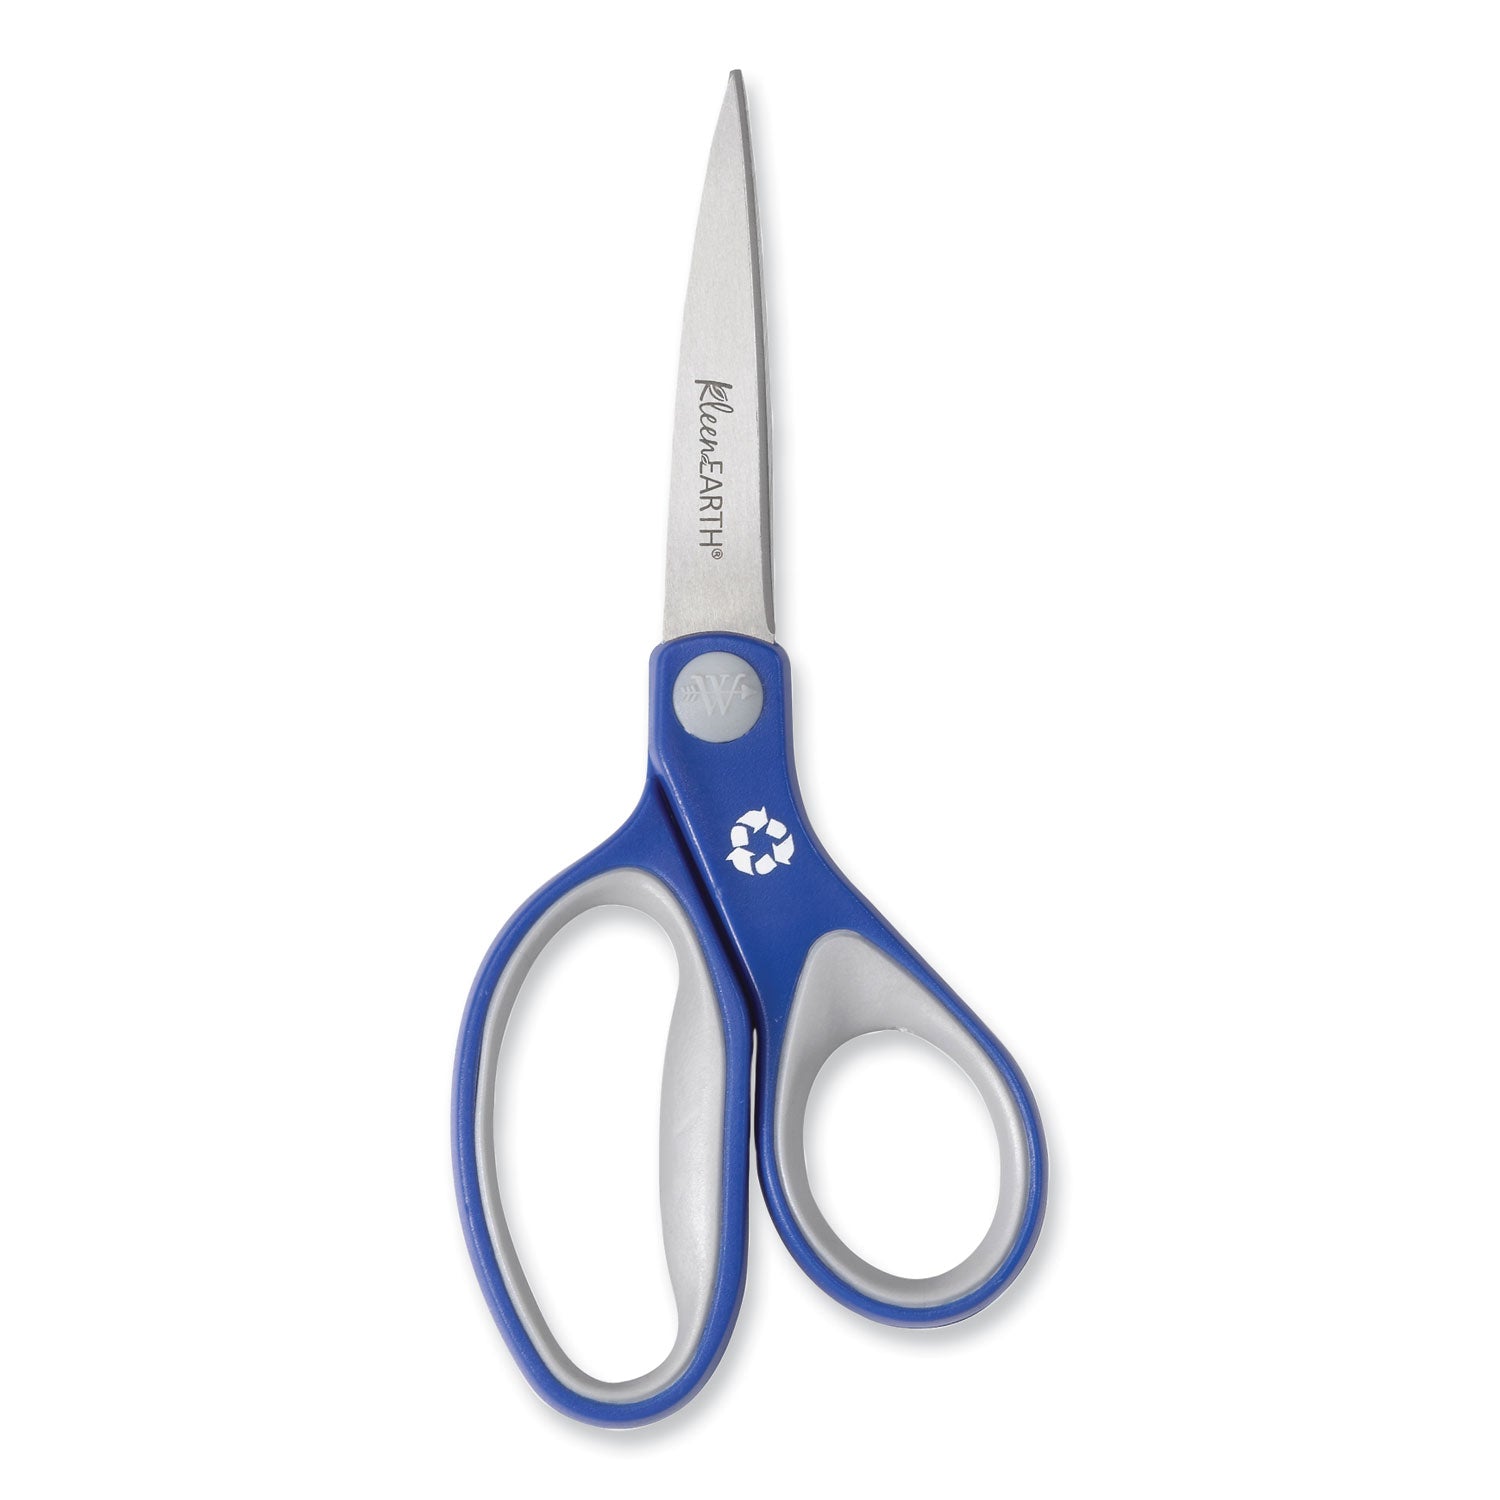 KleenEarth Soft Handle Scissors, Pointed Tip, 7" Long, 2.25" Cut Length, Blue/Gray Straight Handle - 